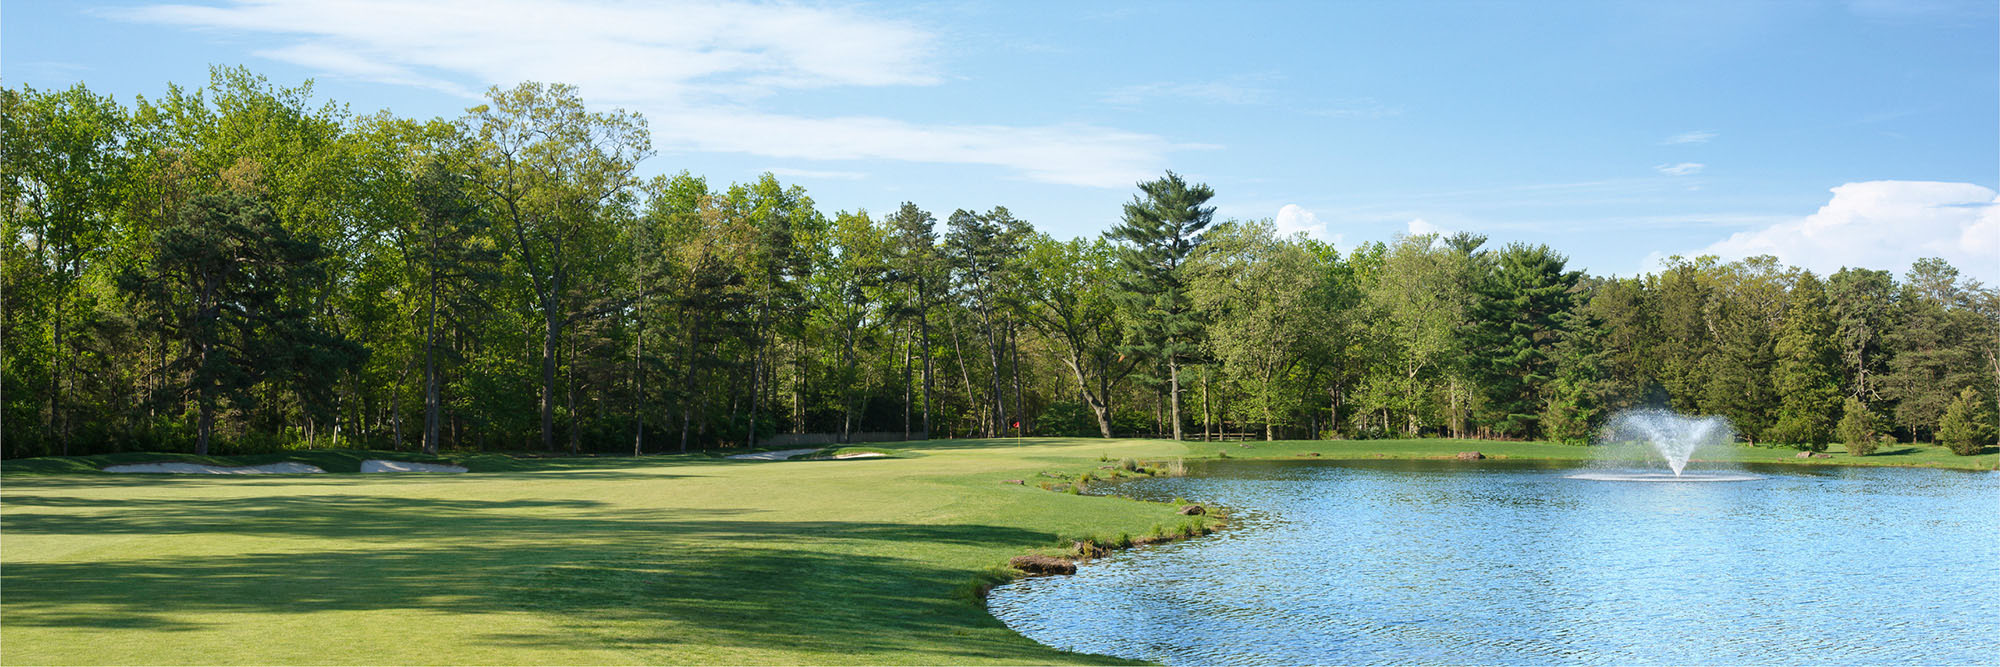 Golf Course Image - Medford Lakes Country Club No. 14